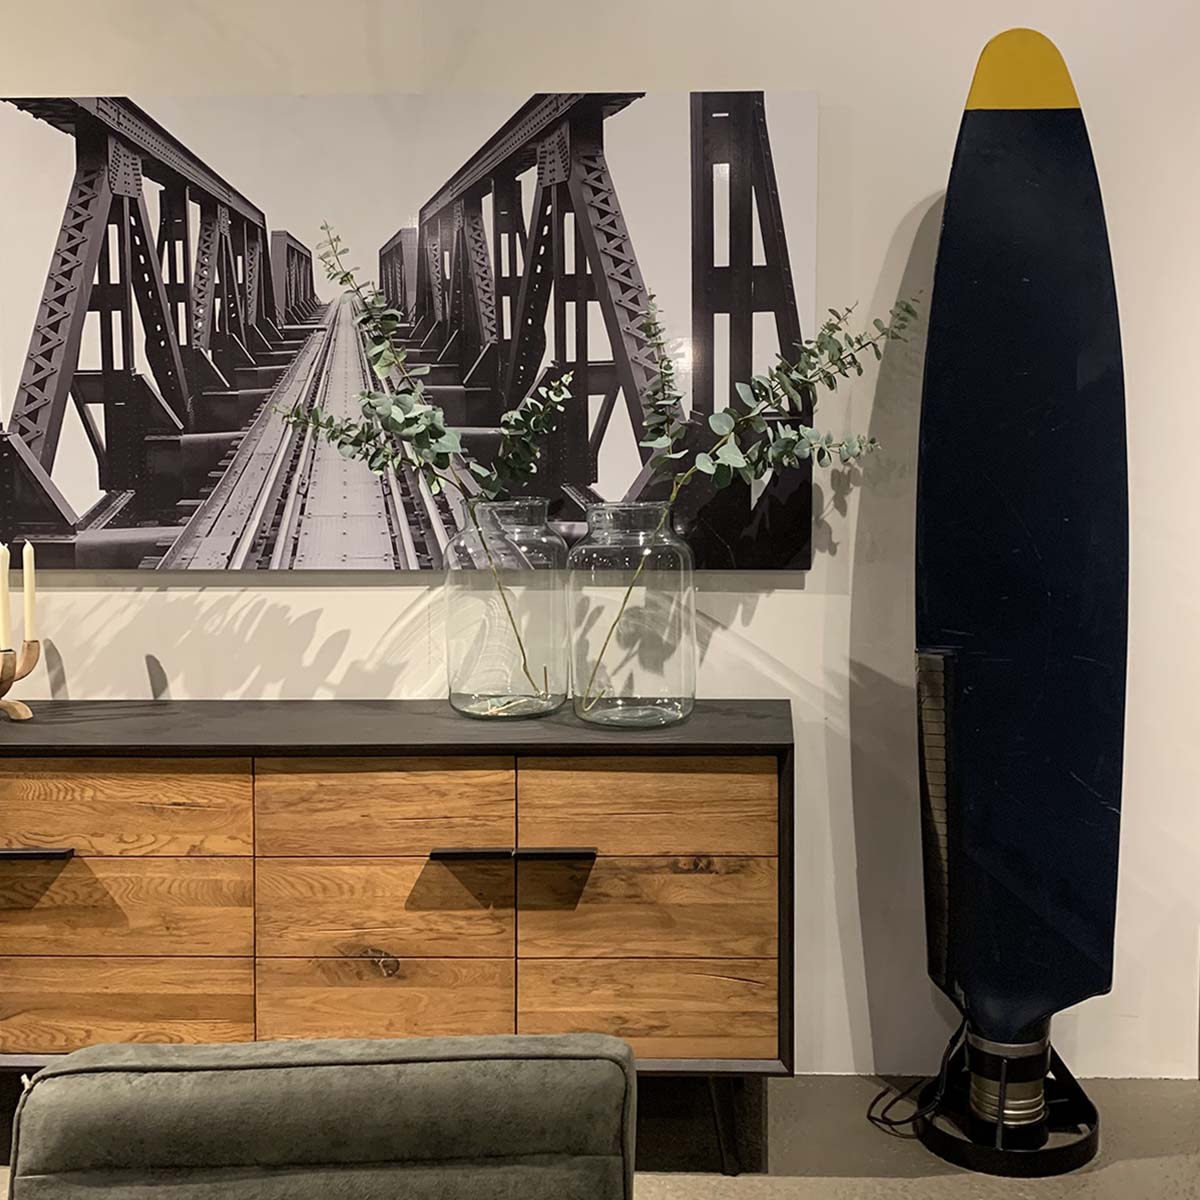 Antonov 24 propeller in use as a decorative piece next to a cabinet in a living room.